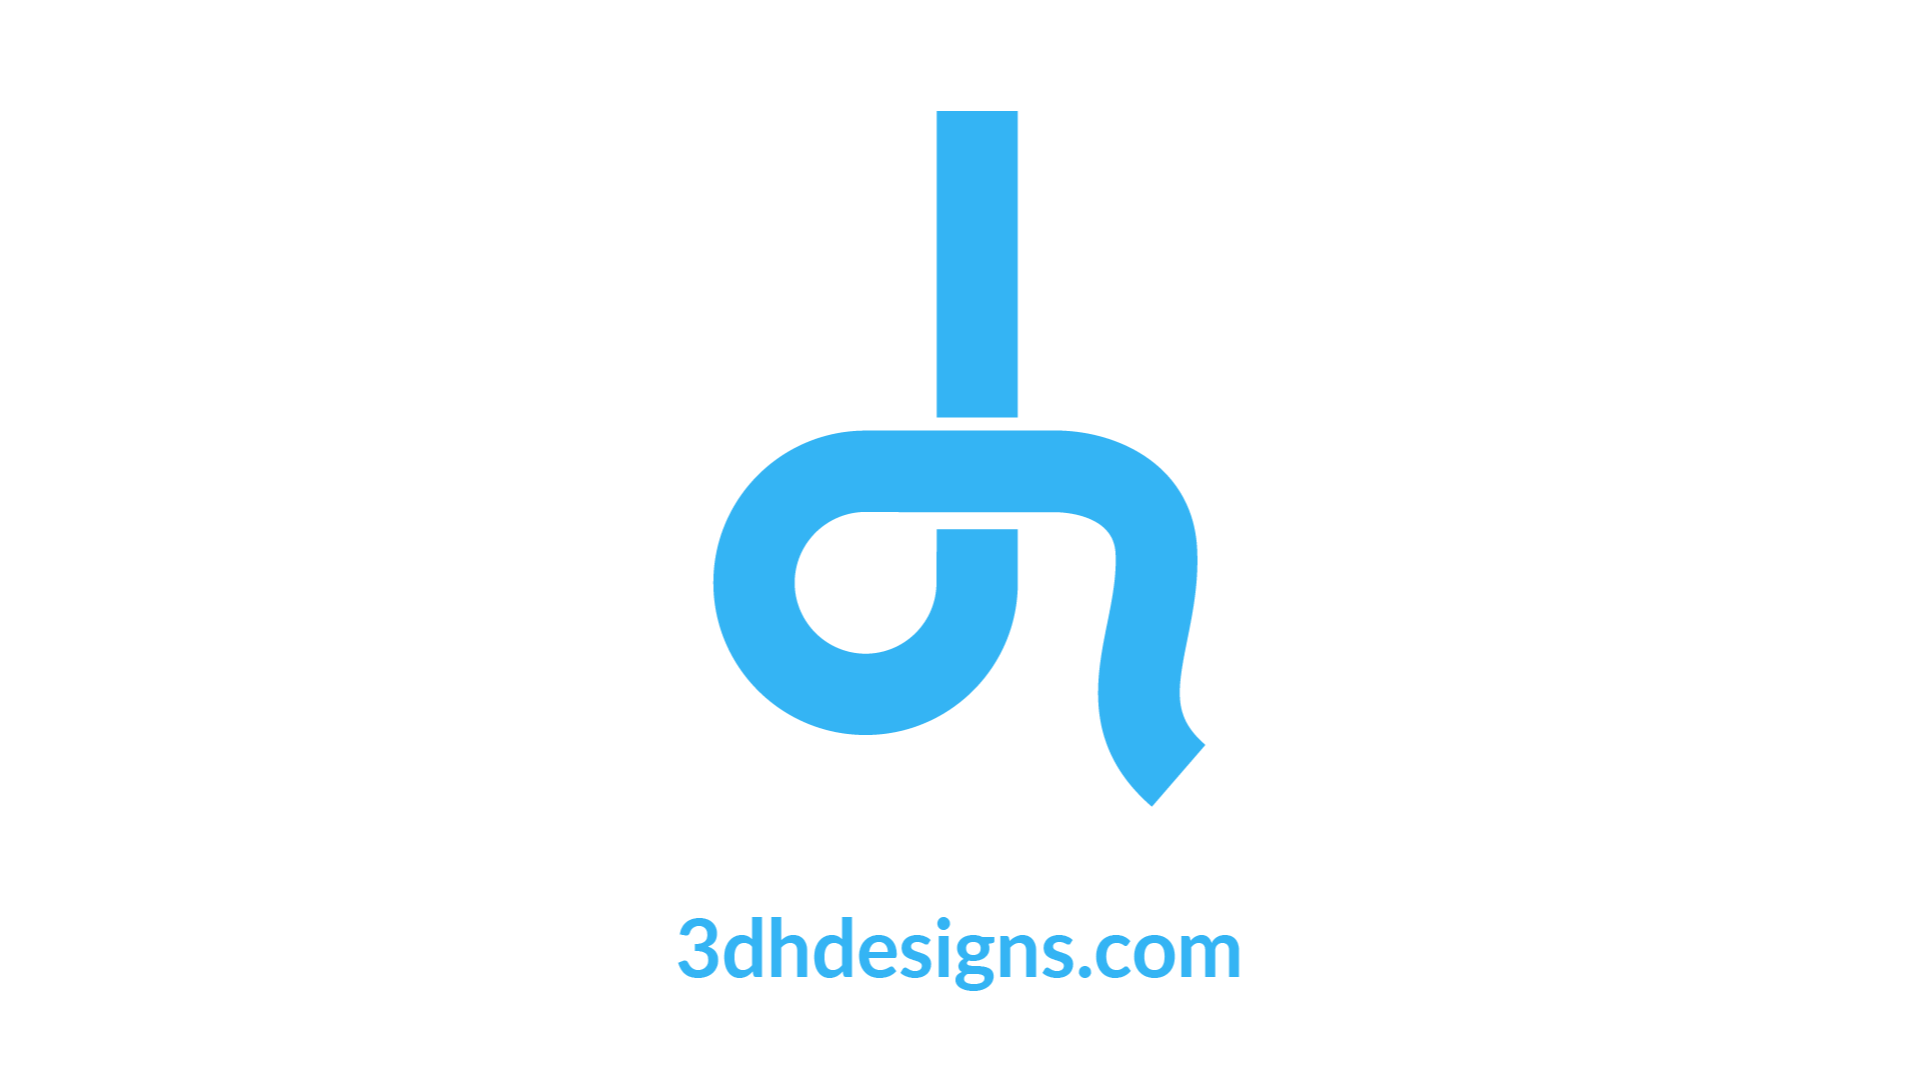 3dhdesigns